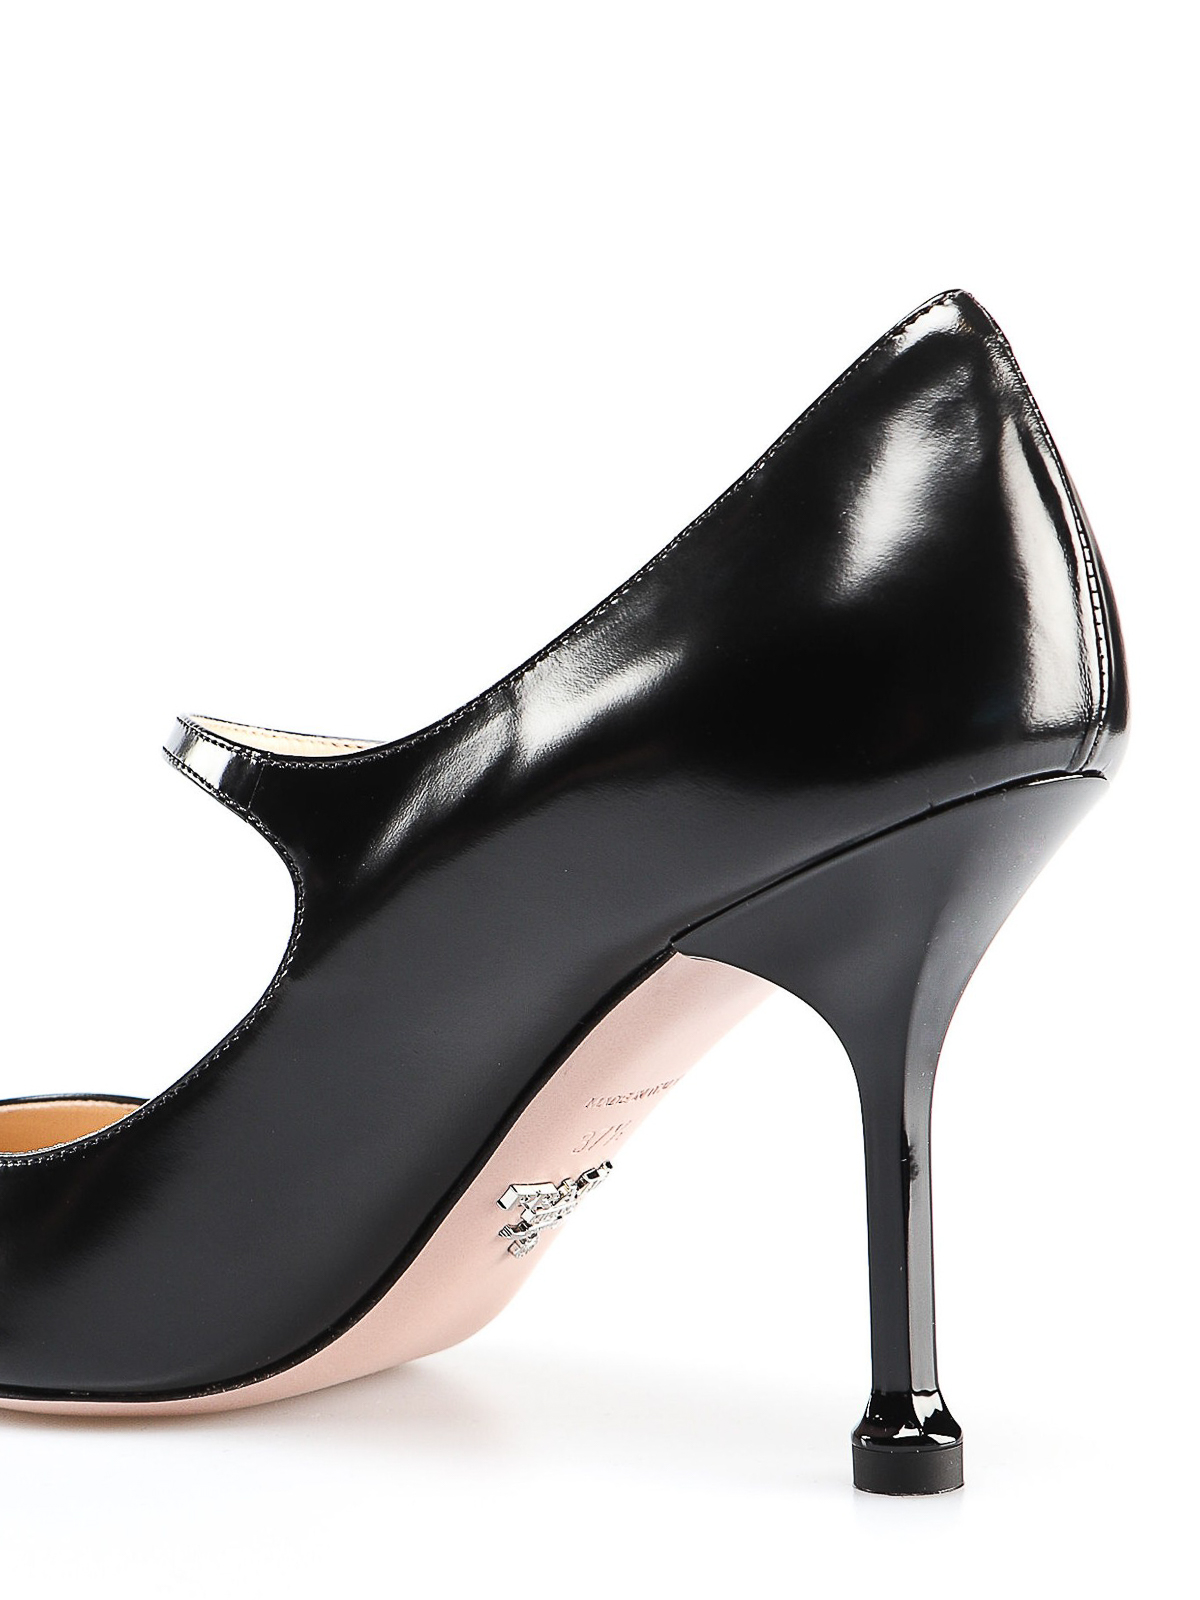 black leather mary jane pumps